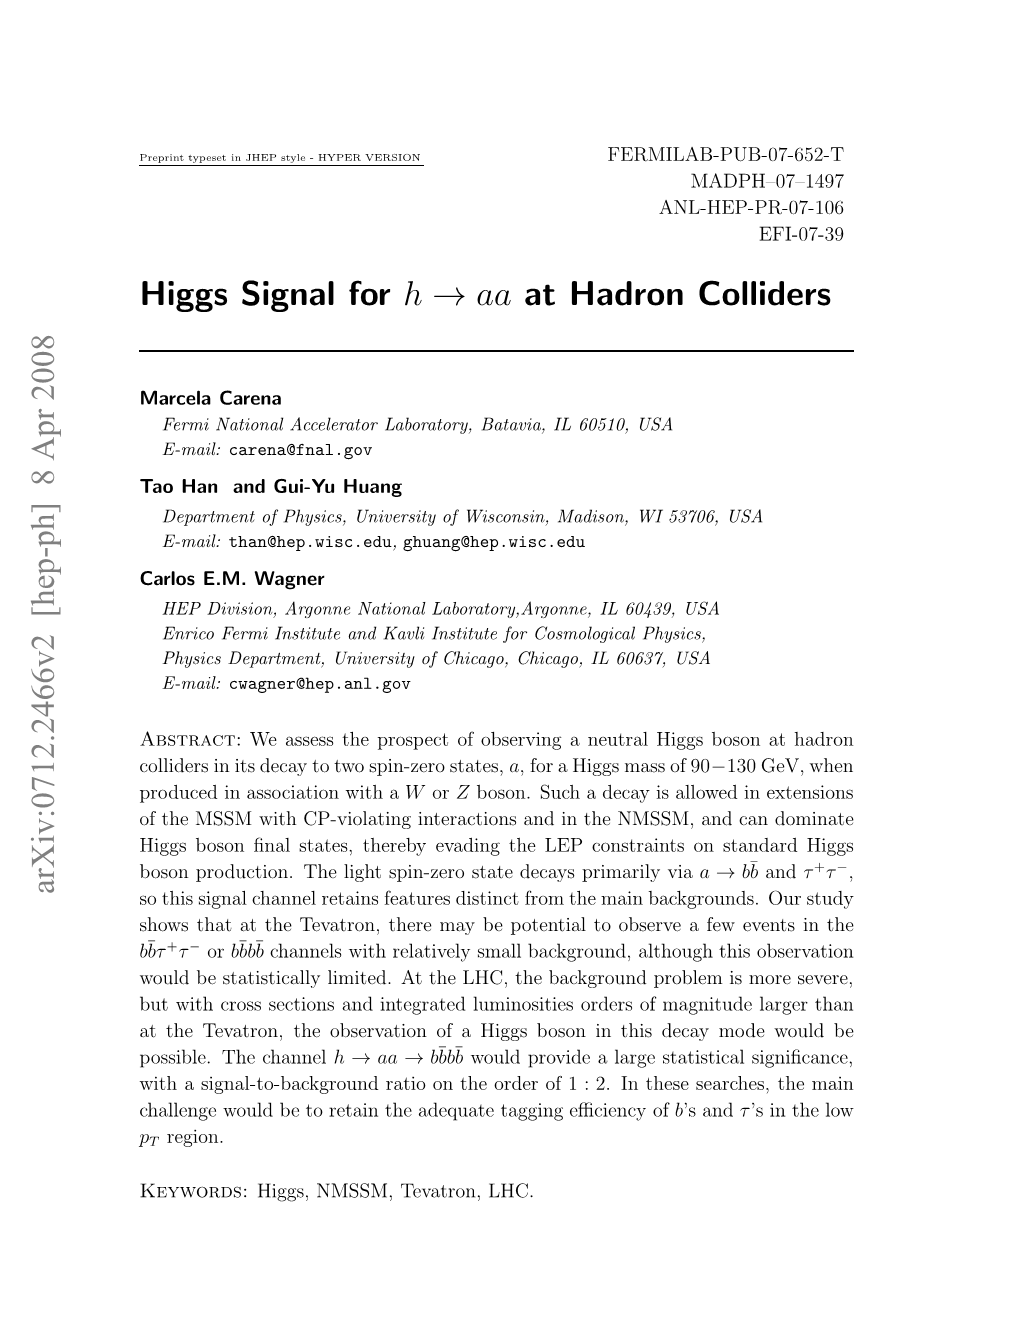 Higgs Signal for H → Aa at Hadron Colliders